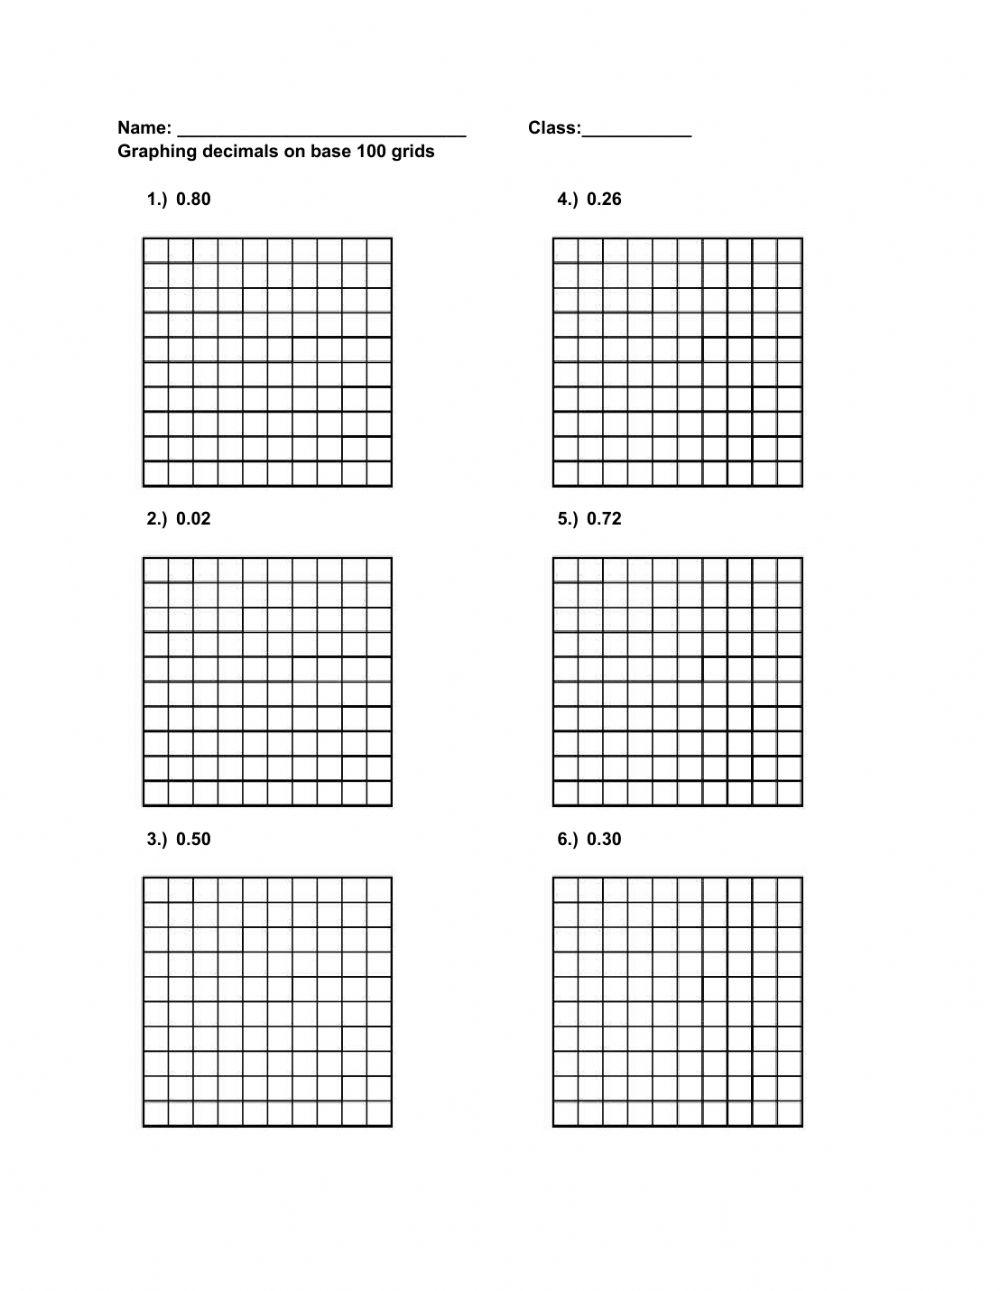 Graphing Decimals on 100 Grid online exercise for | Live Worksheets